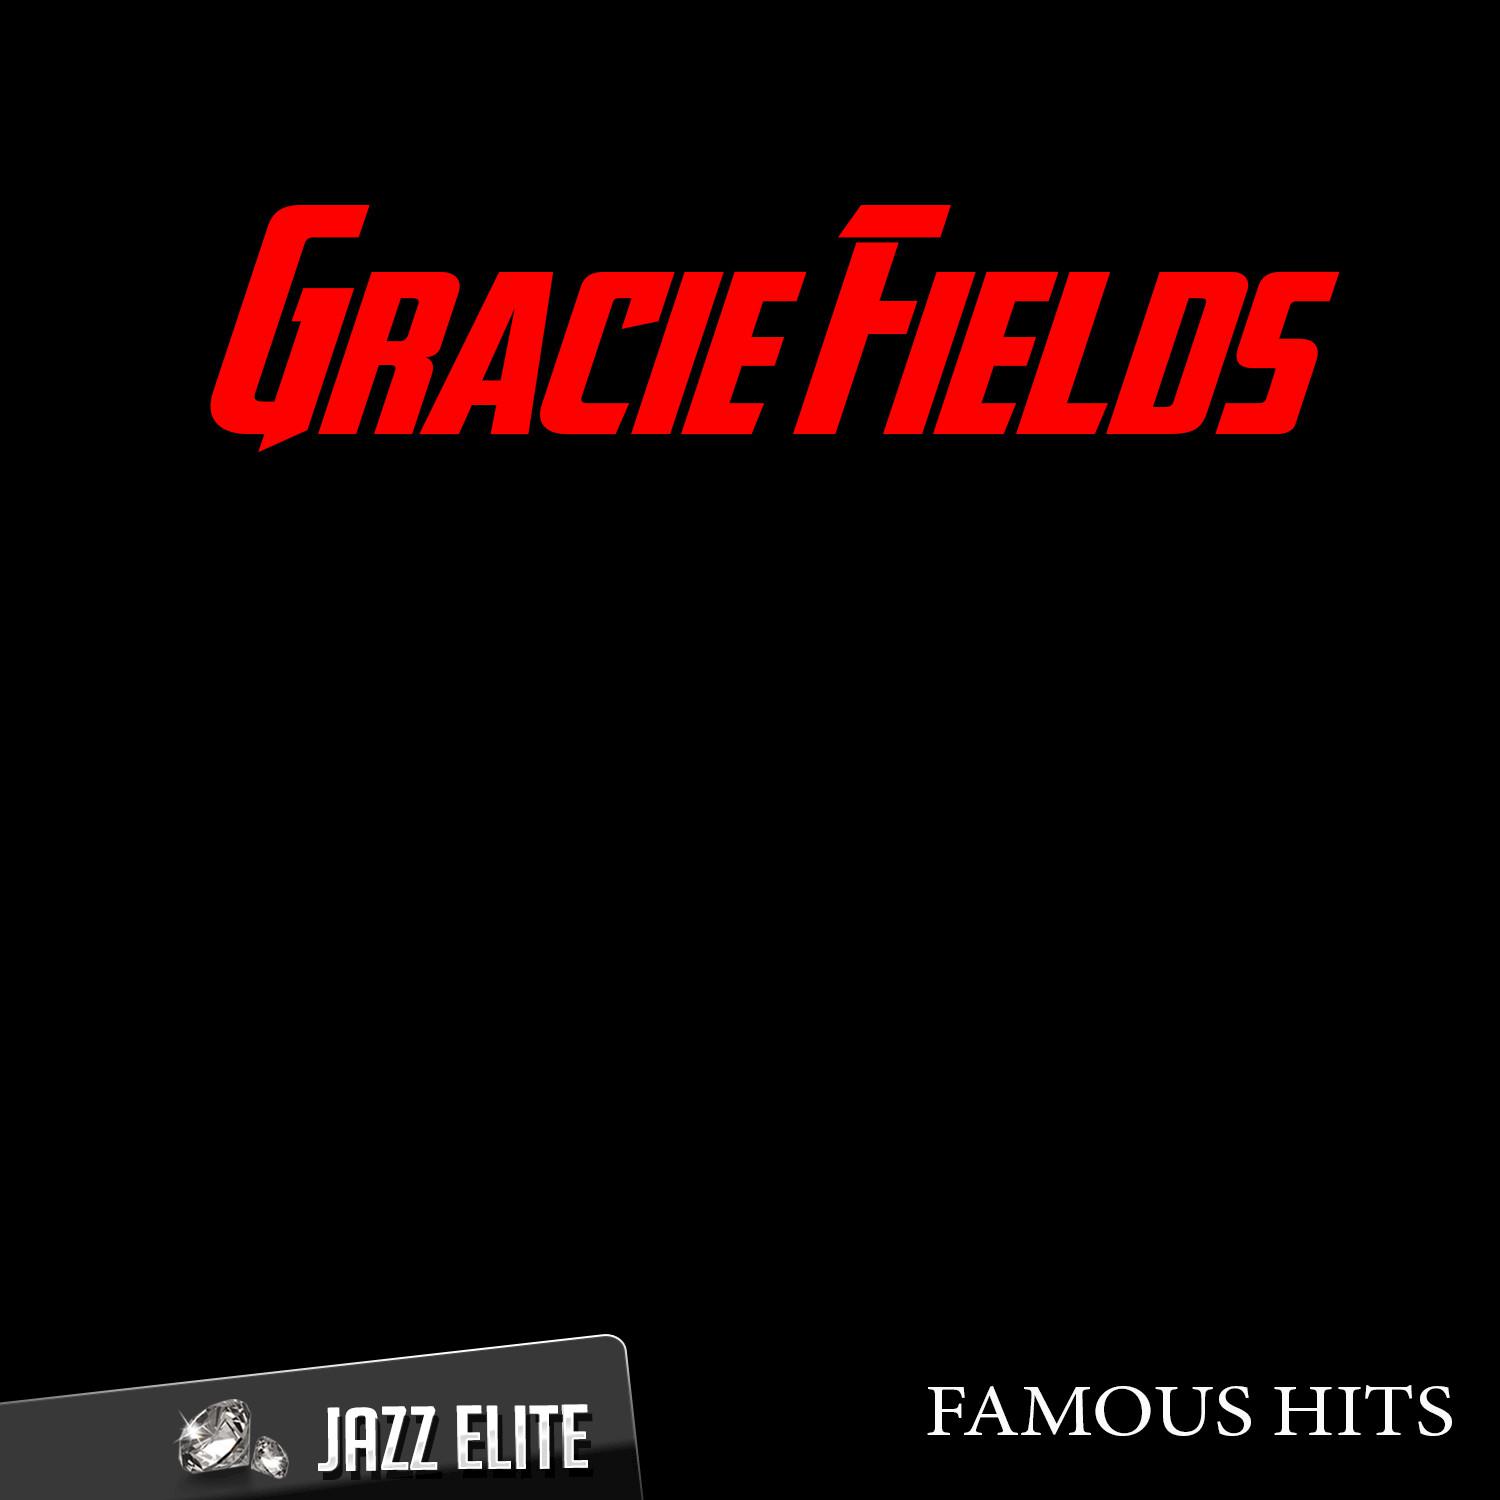 Famous Hits By Gracie Fields